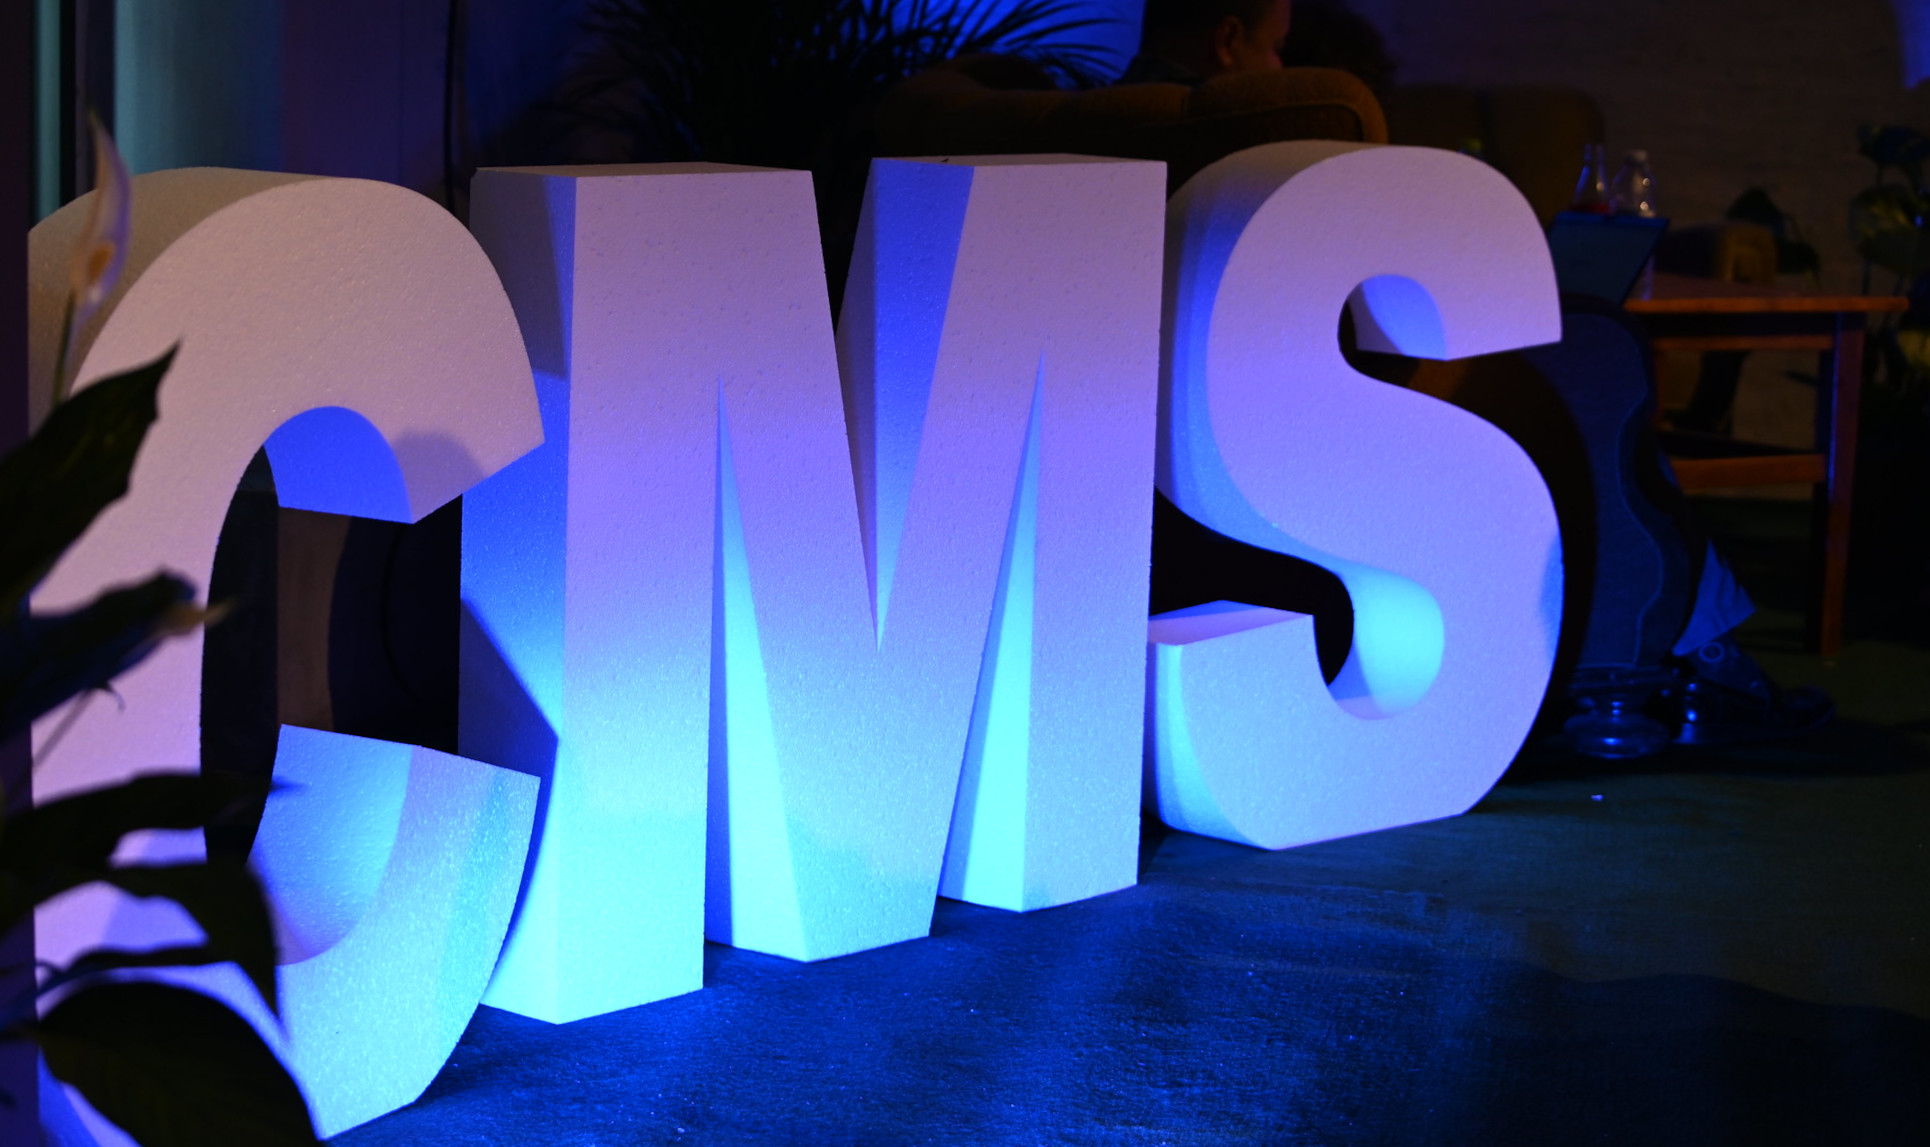 A photo by Umbraco HQ on Flickr of large 3D letters "CMS" at Codegarden.